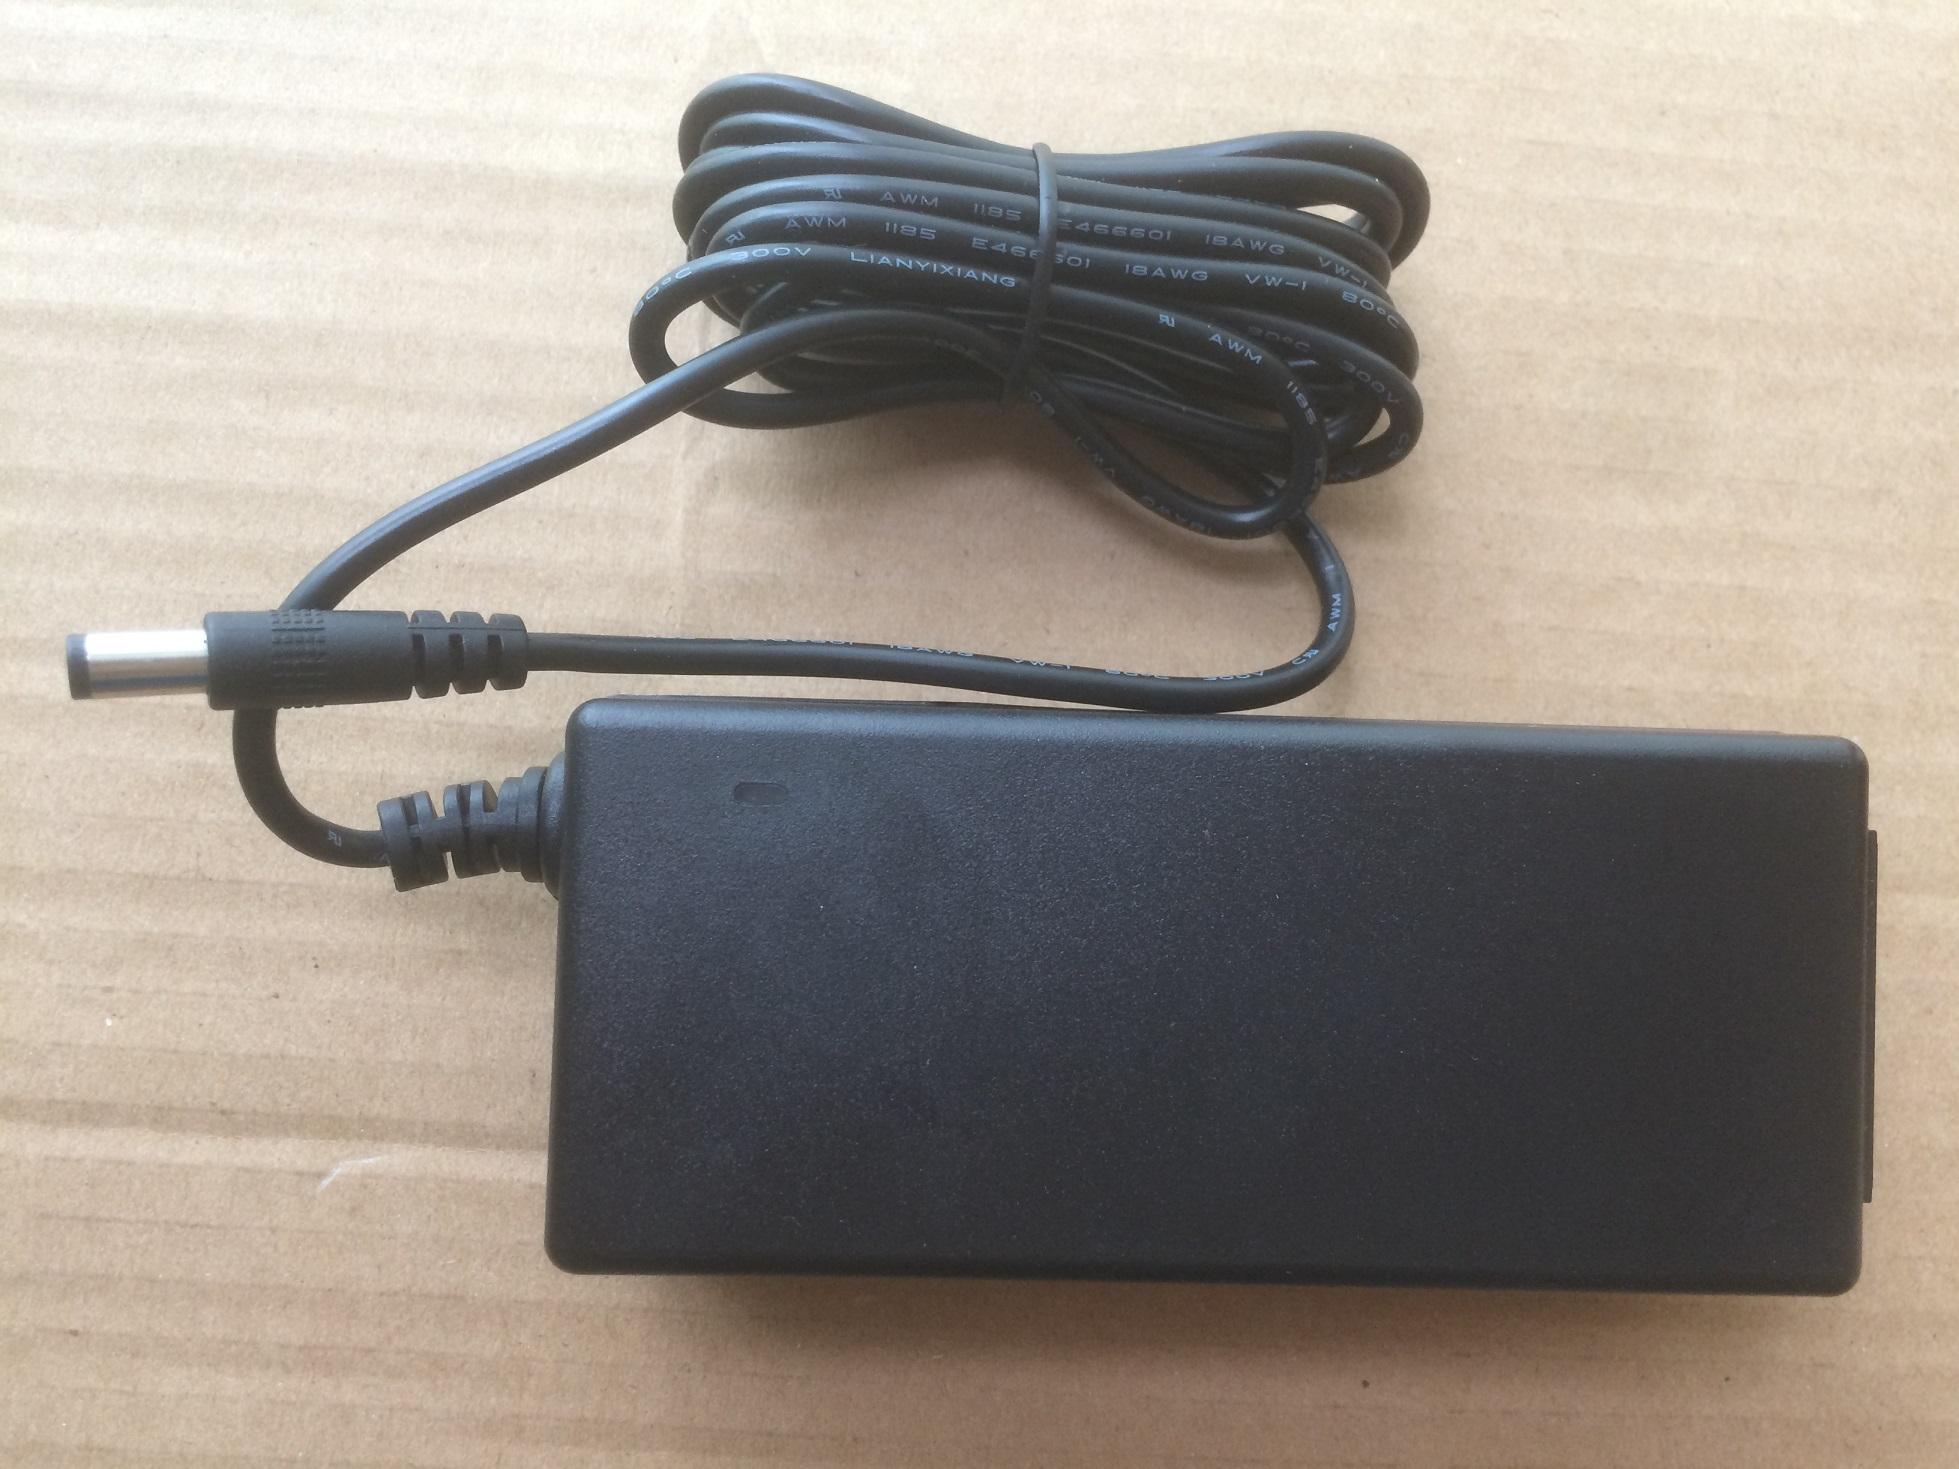 *Brand NEW* 12V 5A AC ADAPTER FOR Digital Video Recorder 1GEO651DA-1250 POWER Supply IN STOCK